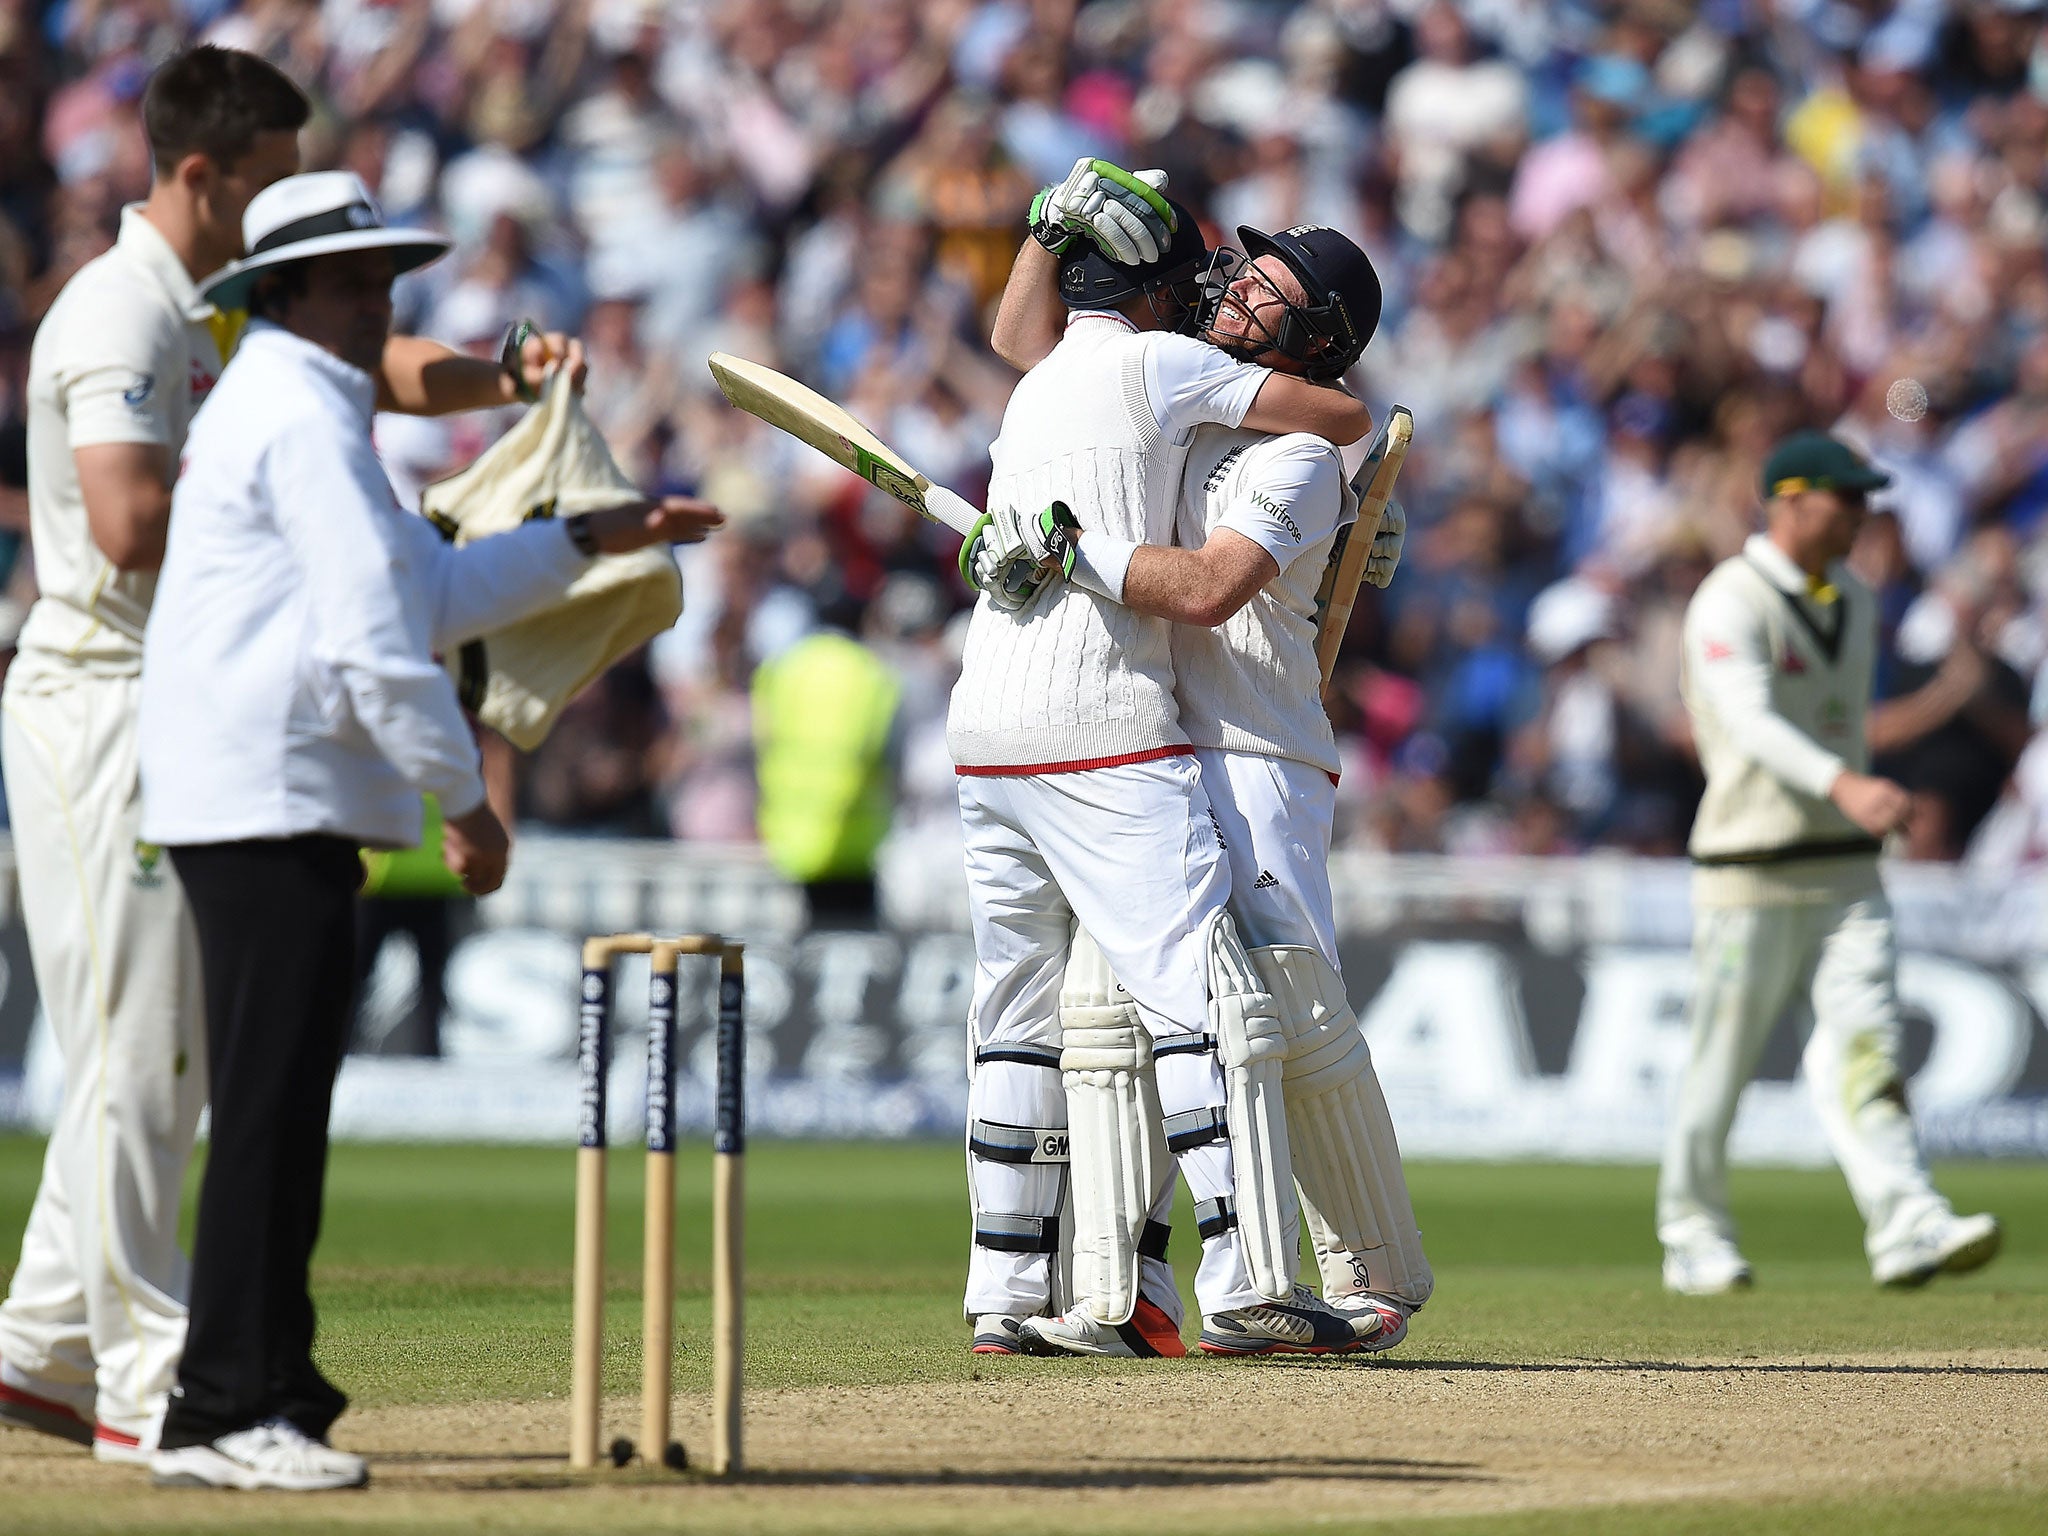 Joe Root and Ian Bell celebrate after adding the winning runs for England on the third day